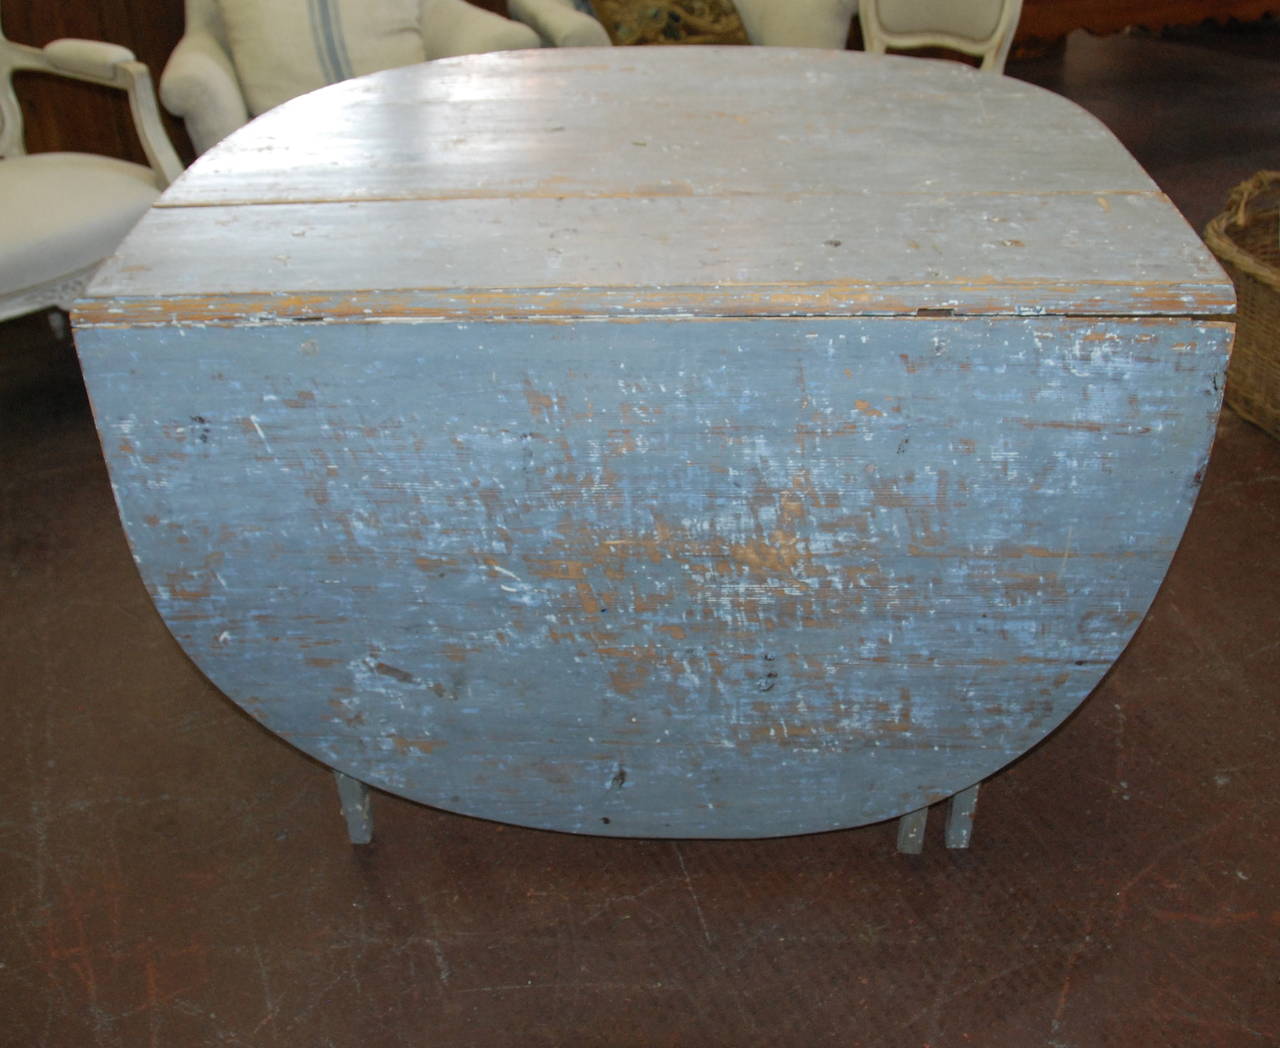 Very nice early 19th century Swedish drop-leaf table with aged blue patina. Tapered legs and iron hinges all original.